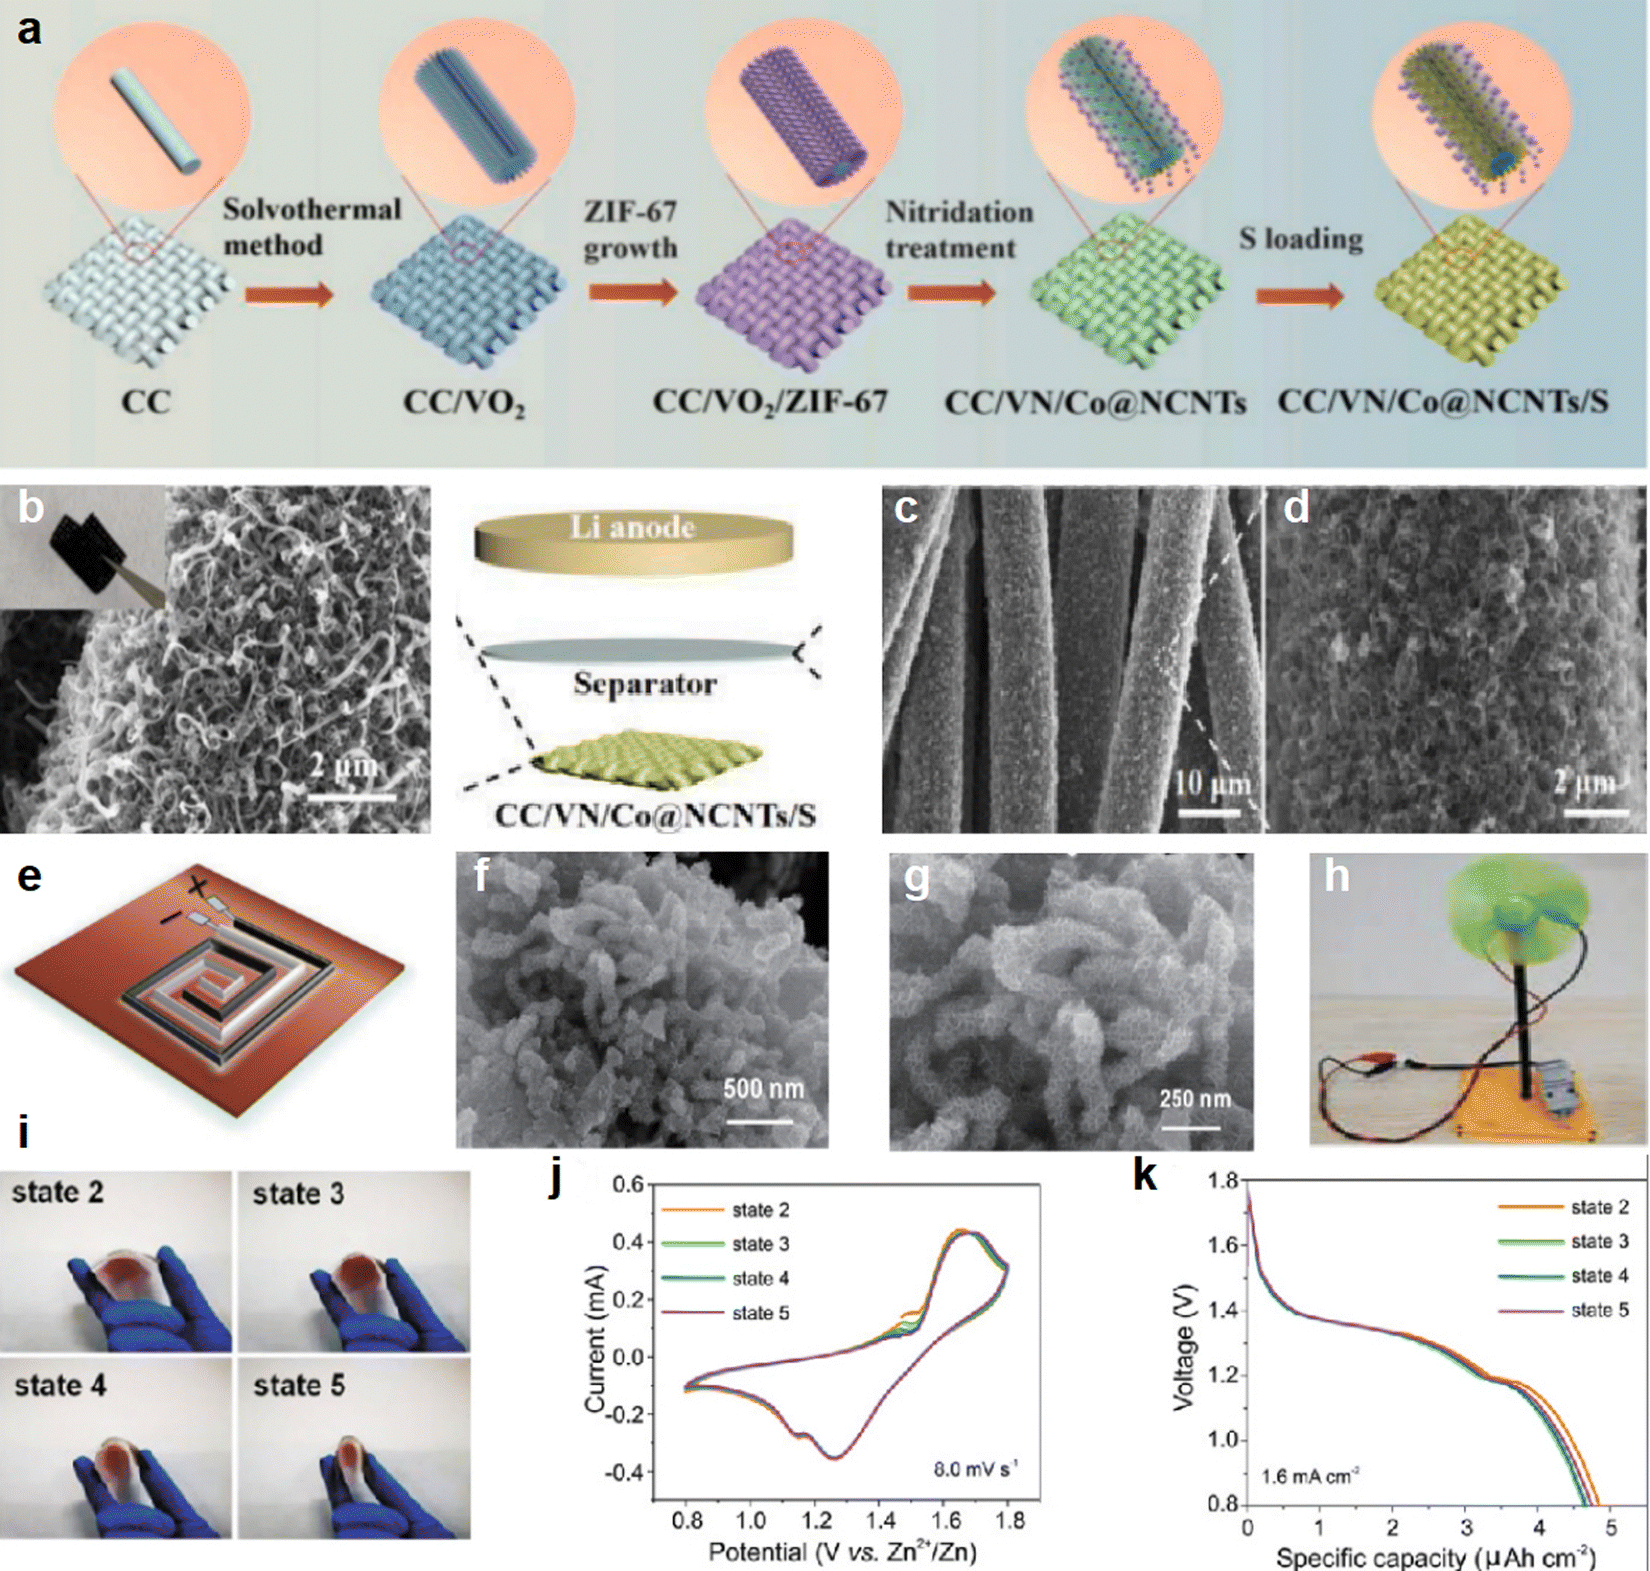 Mechanics and electrochemistry in nature-inspired functional